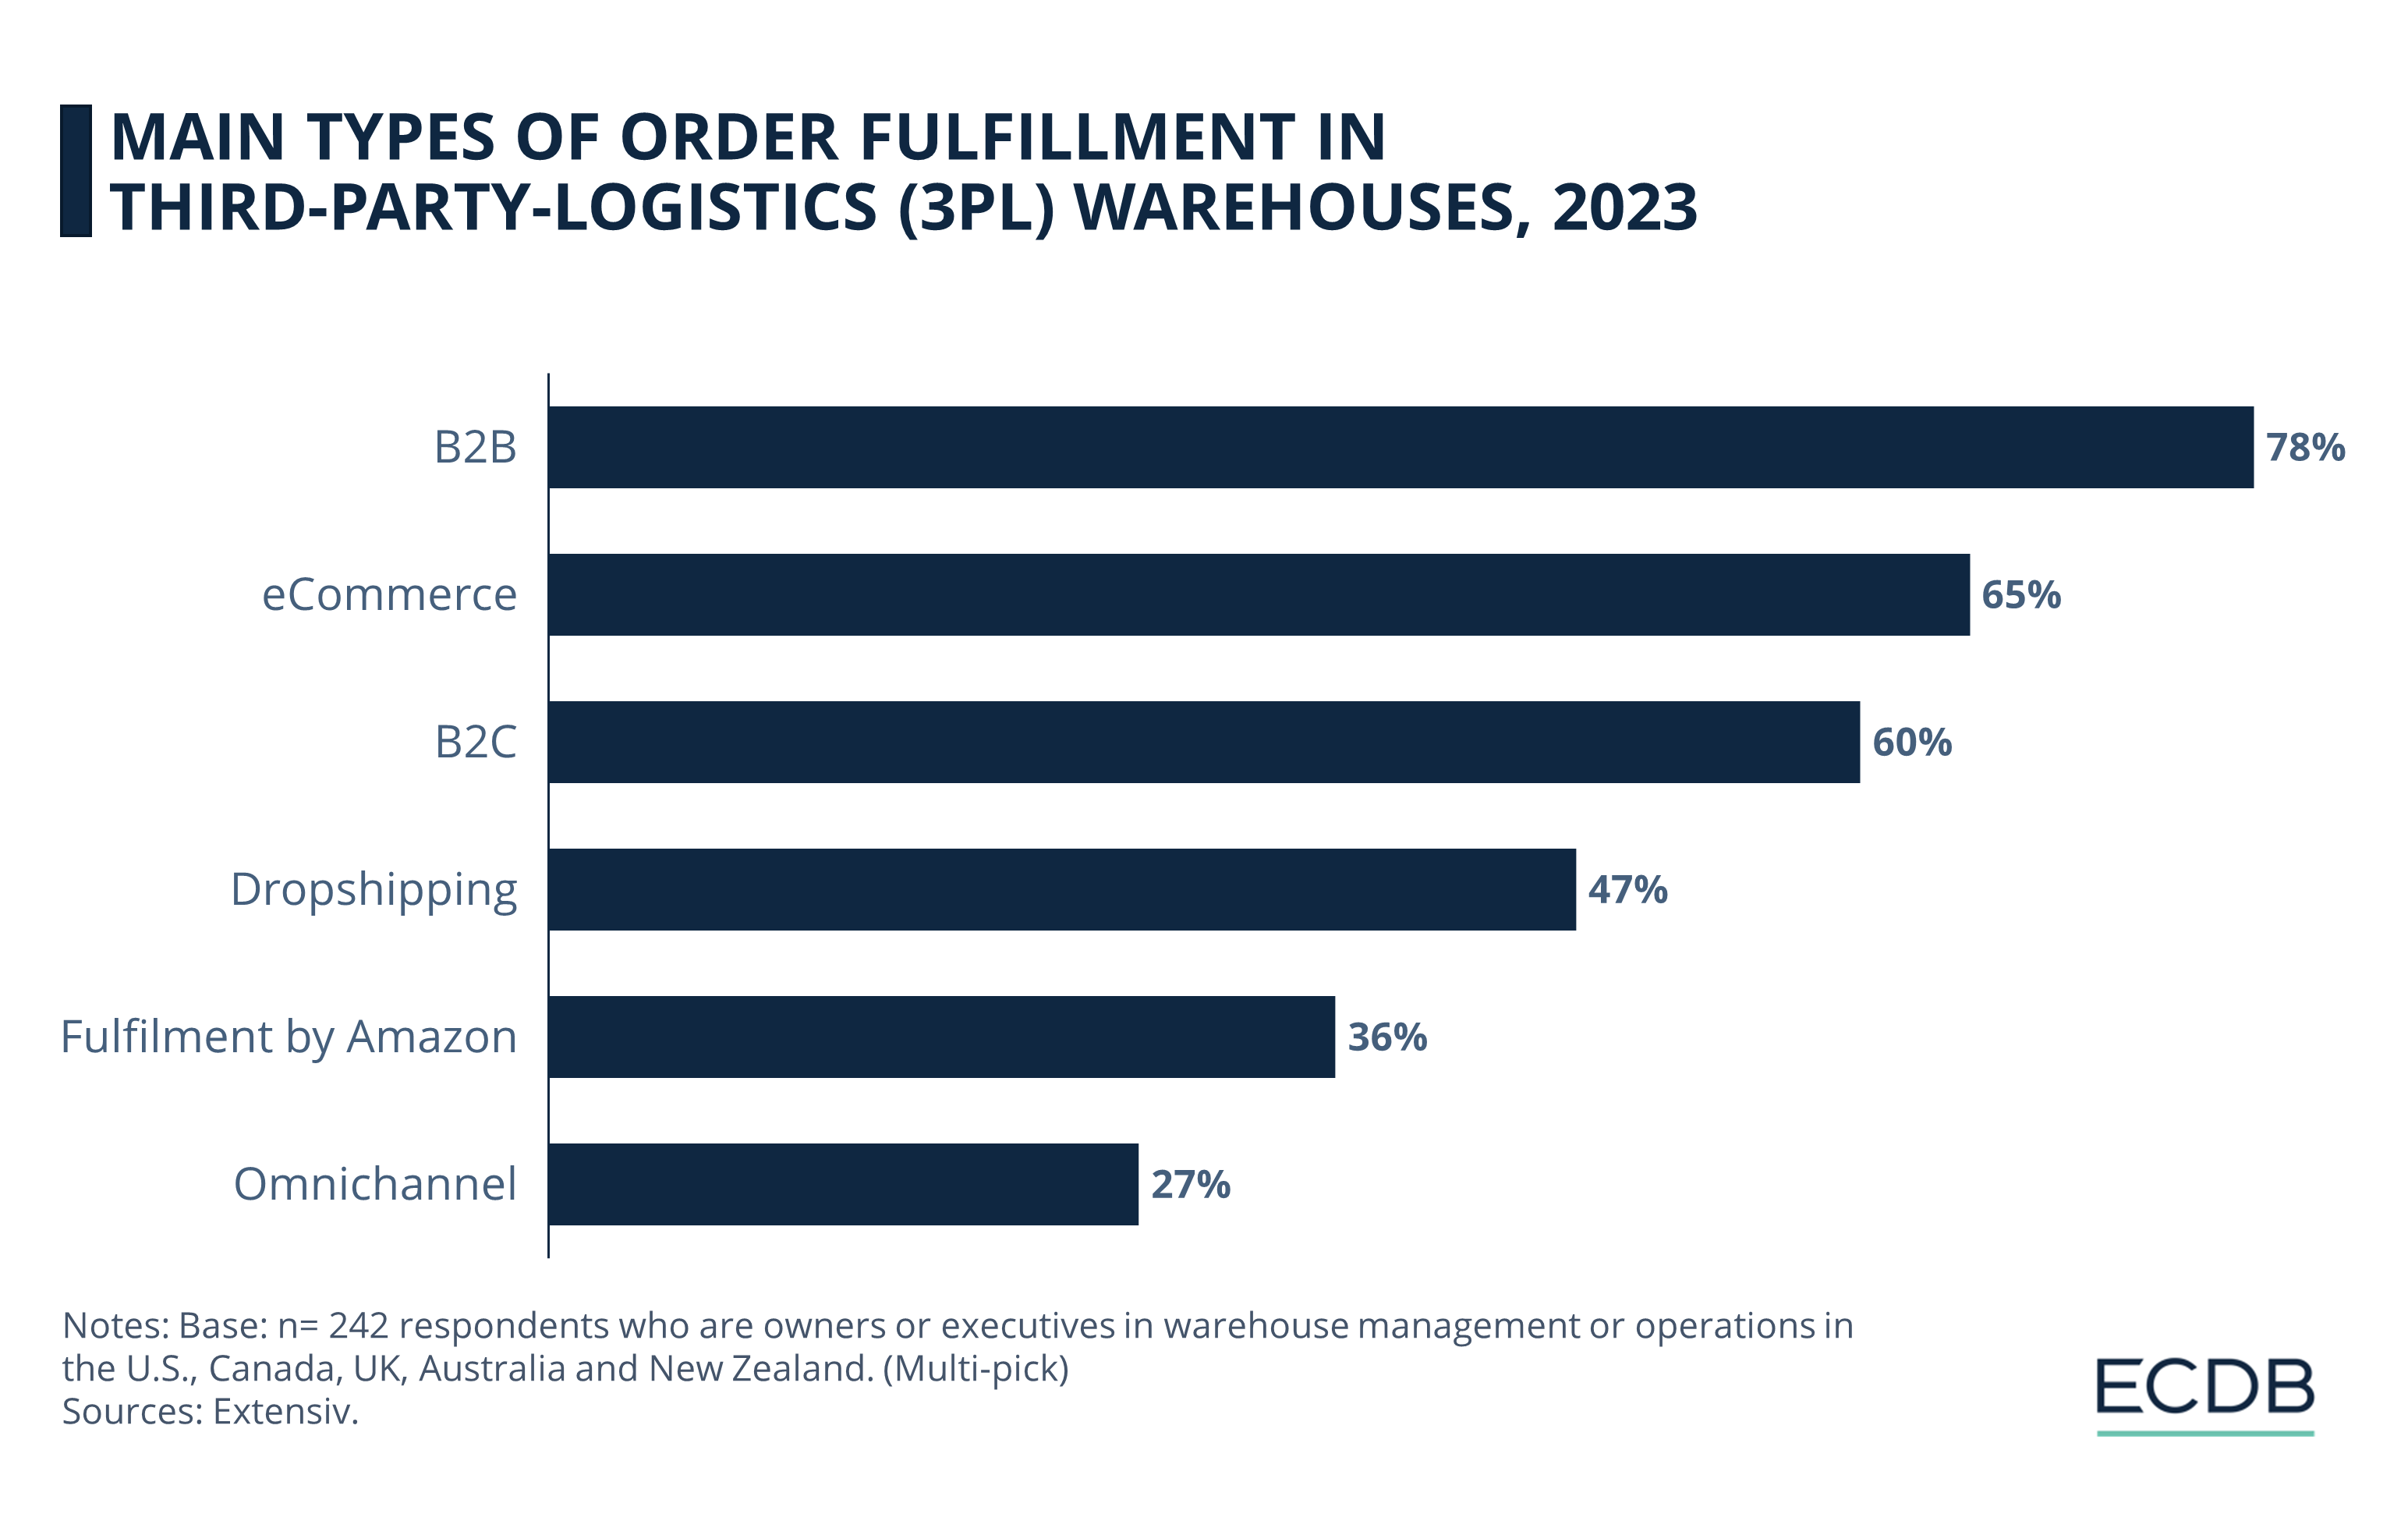 Main Types of Order Fulfillment in Third-Party-Logistics (3PL) Warehouses, 2023